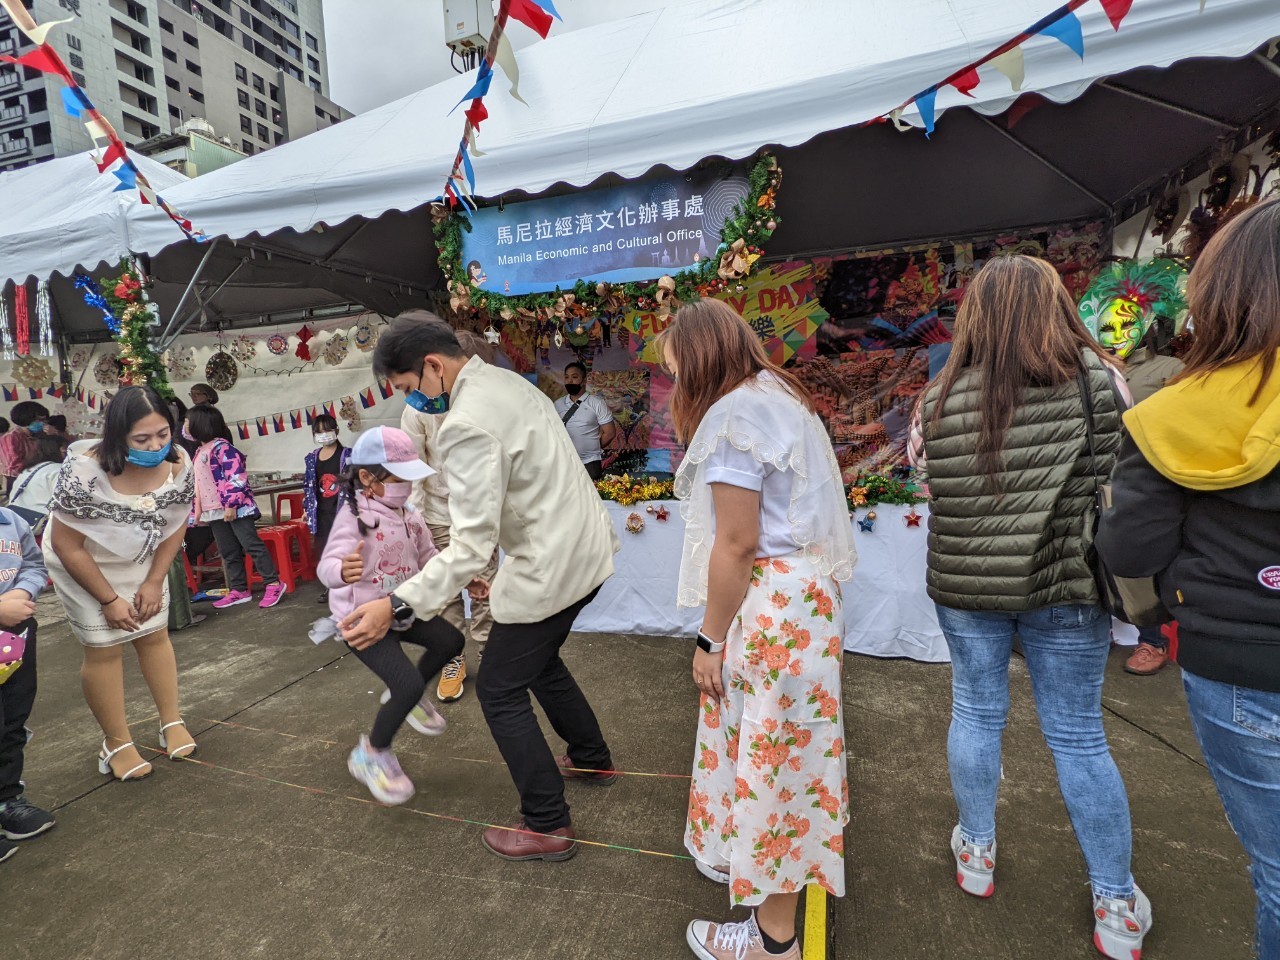 Free cultural activities at the event. (Photo / Provided by the Taiwan Immigrants' Global News Network)